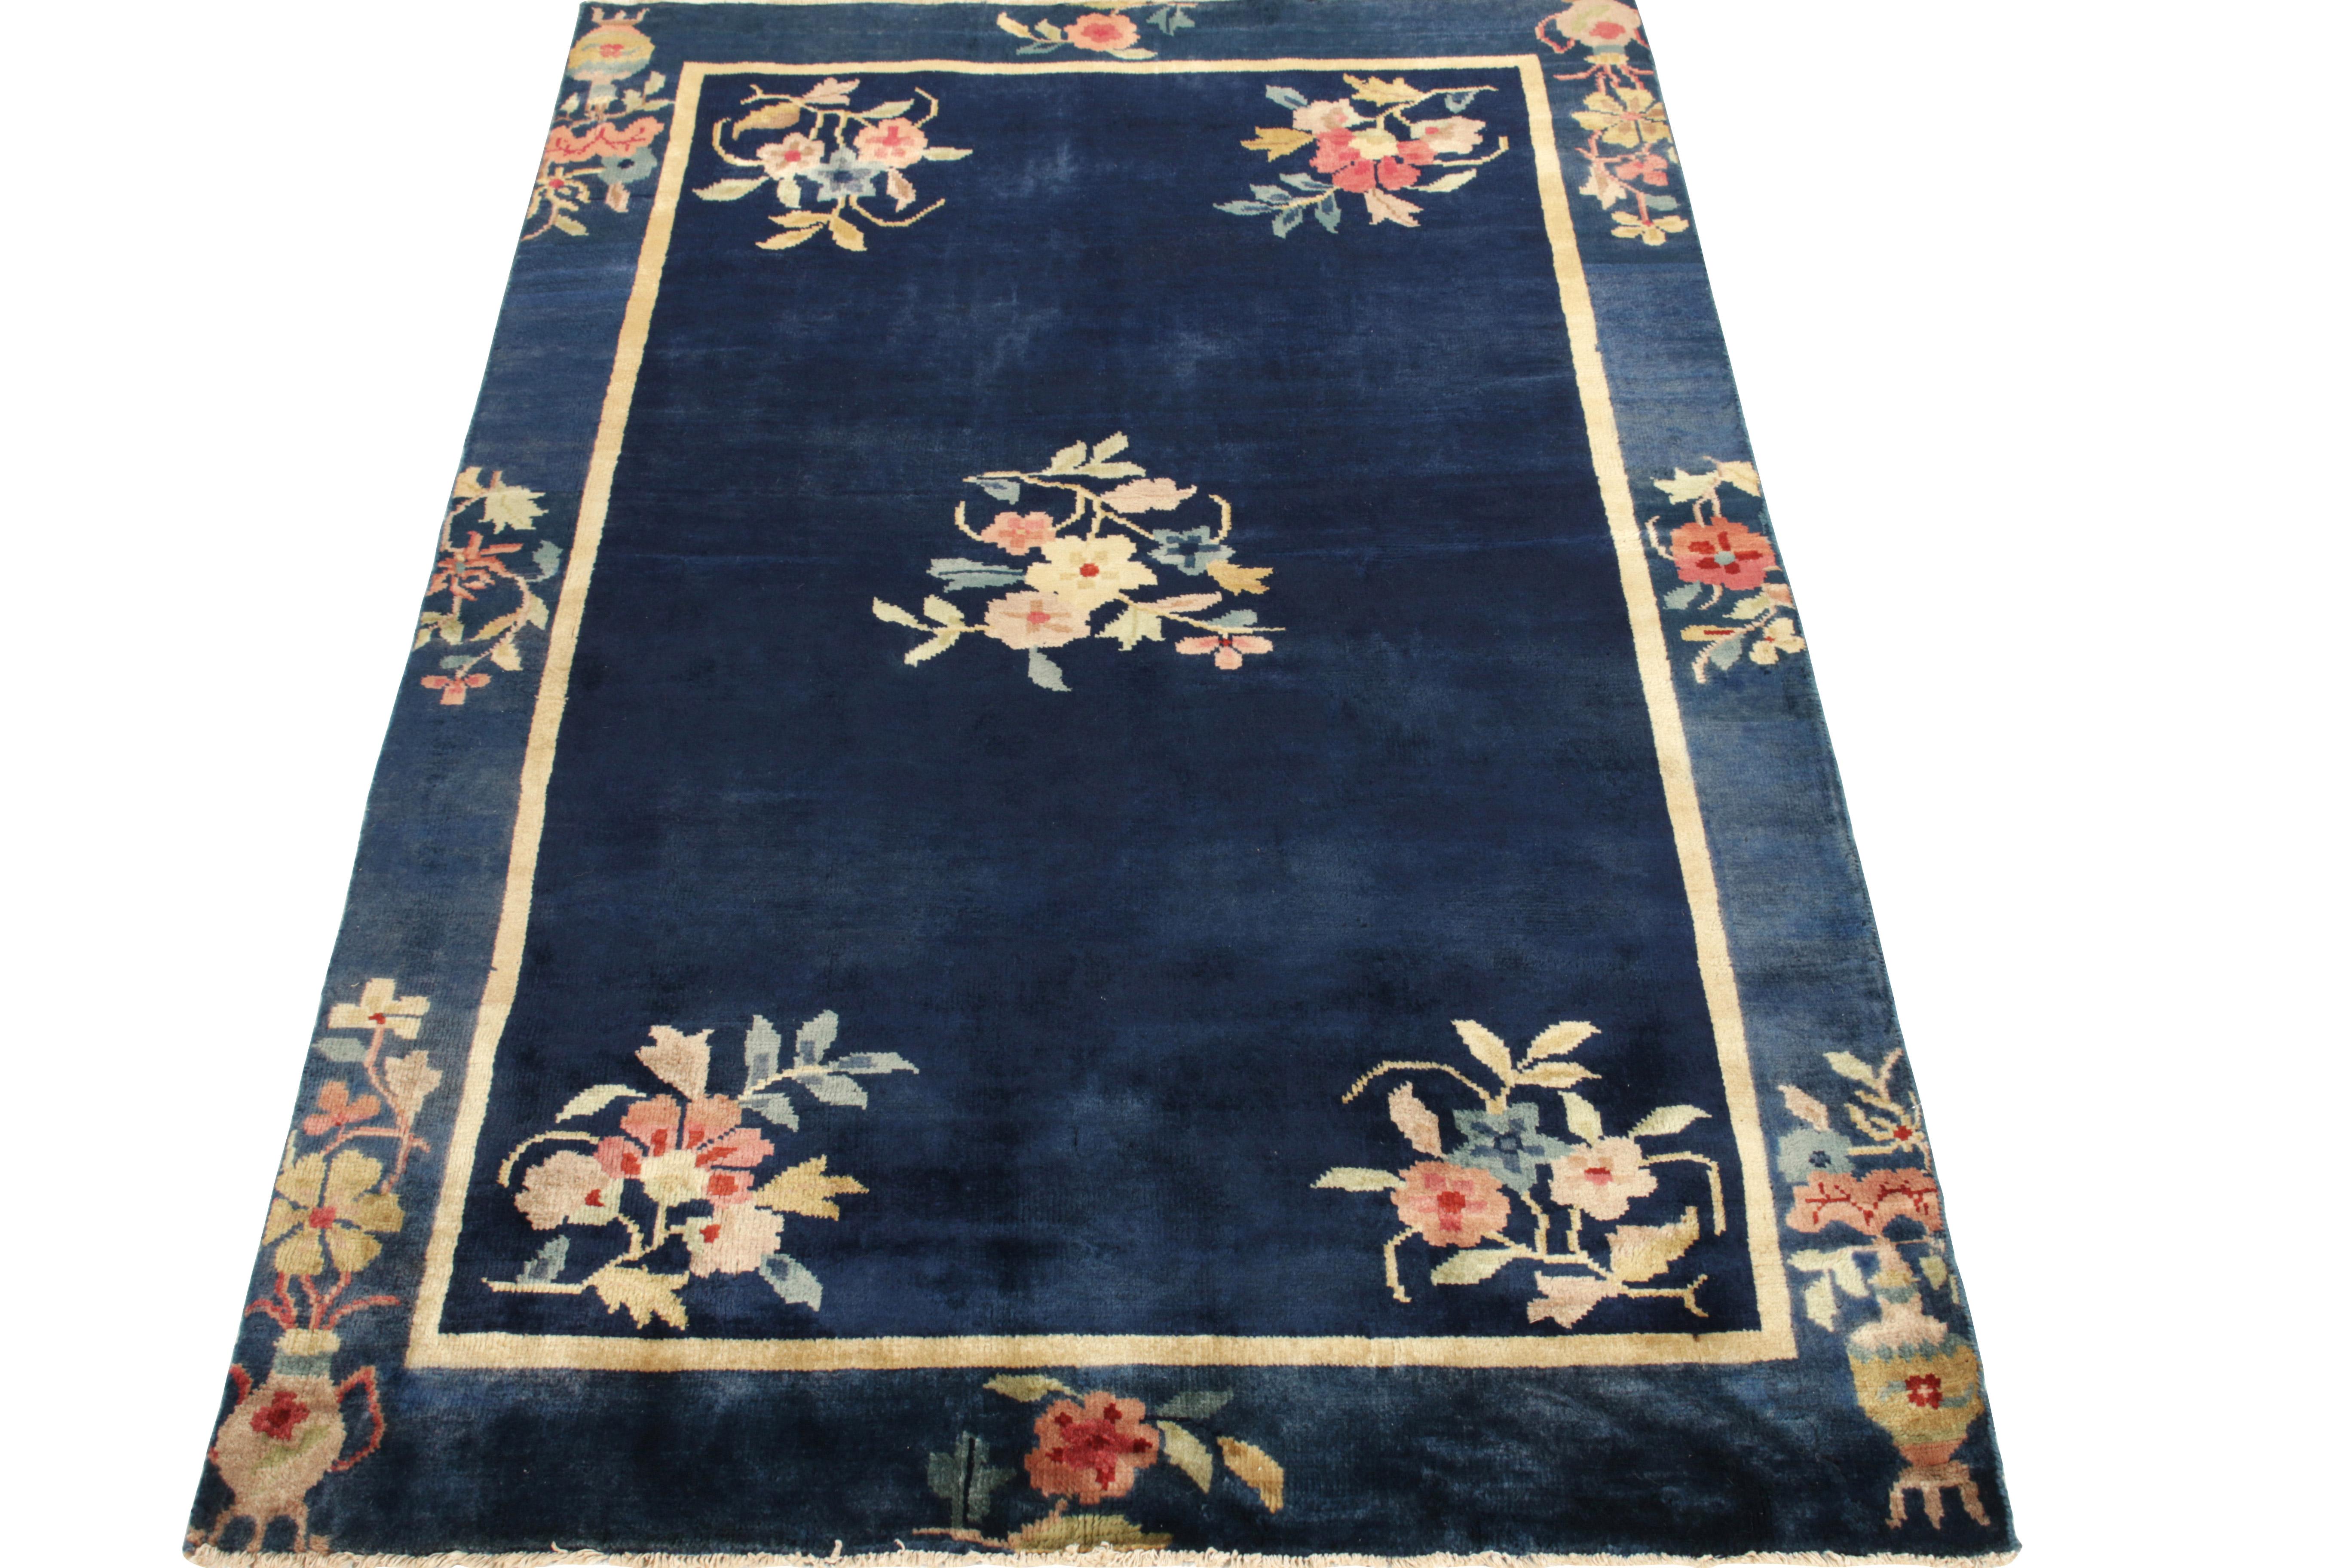 Celebrating the Chinese Art deco style of the 1920s, a 4x6 vintage rug from Rug & Kilim’s newest line of modern classics—carrying a montage of vase pictorials & floral patterns in red, baby pink & lime green decorating the the deep blue border &